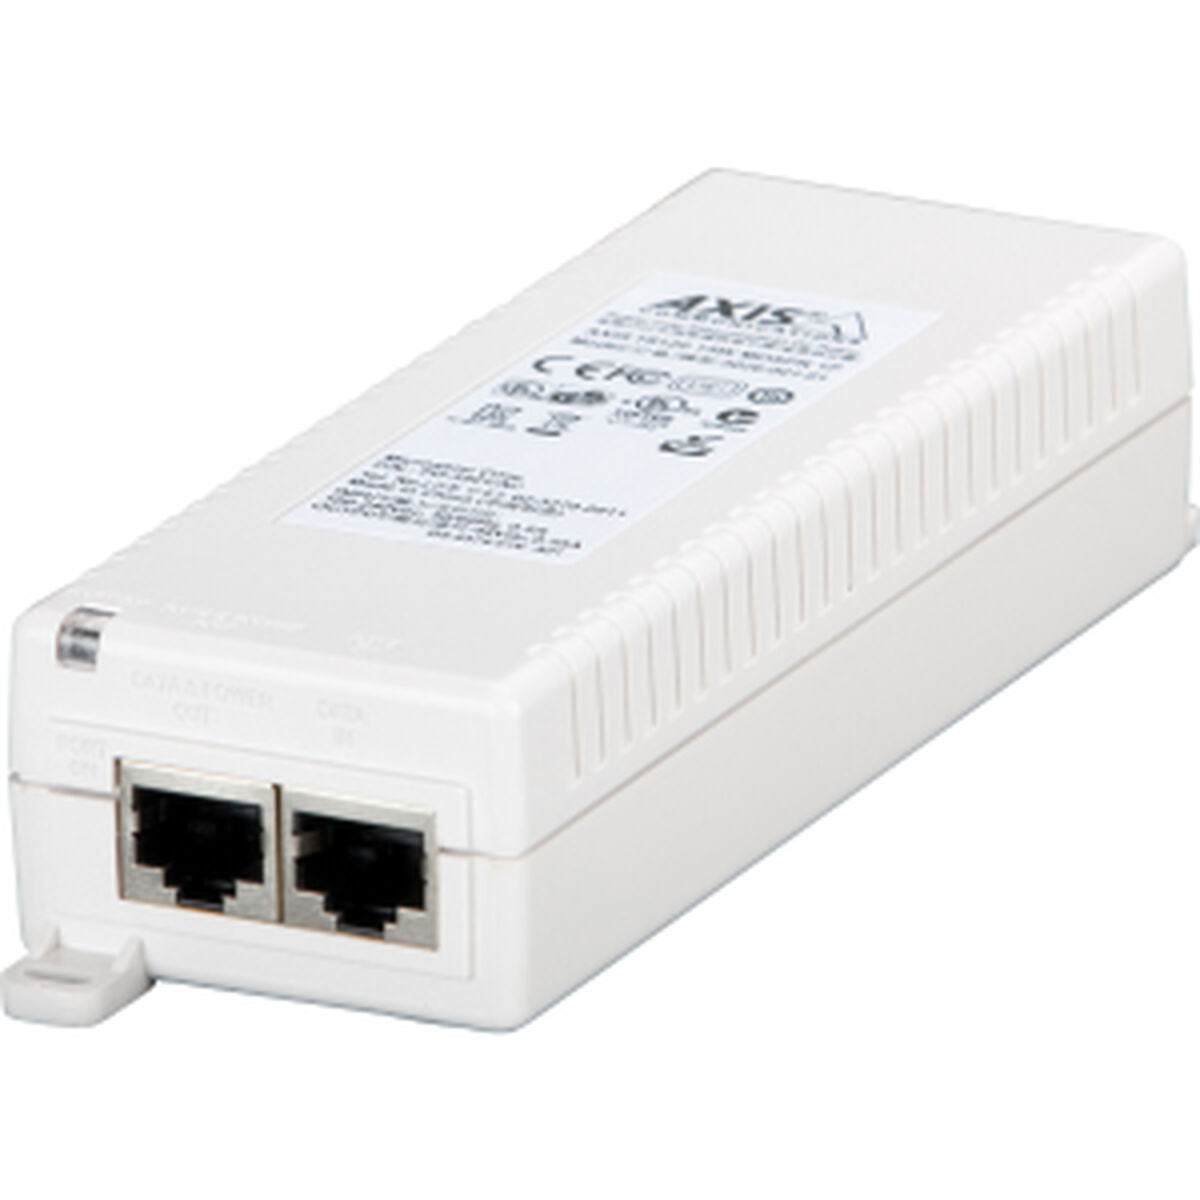 PoE Injector Axis T8120, Axis, Computing, Network devices, poe-injector-axis-t8120, Brand_Axis, category-reference-2609, category-reference-2803, category-reference-2827, category-reference-t-19685, category-reference-t-19914, Condition_NEW, networks/wiring, Price_50 - 100, Teleworking, RiotNook